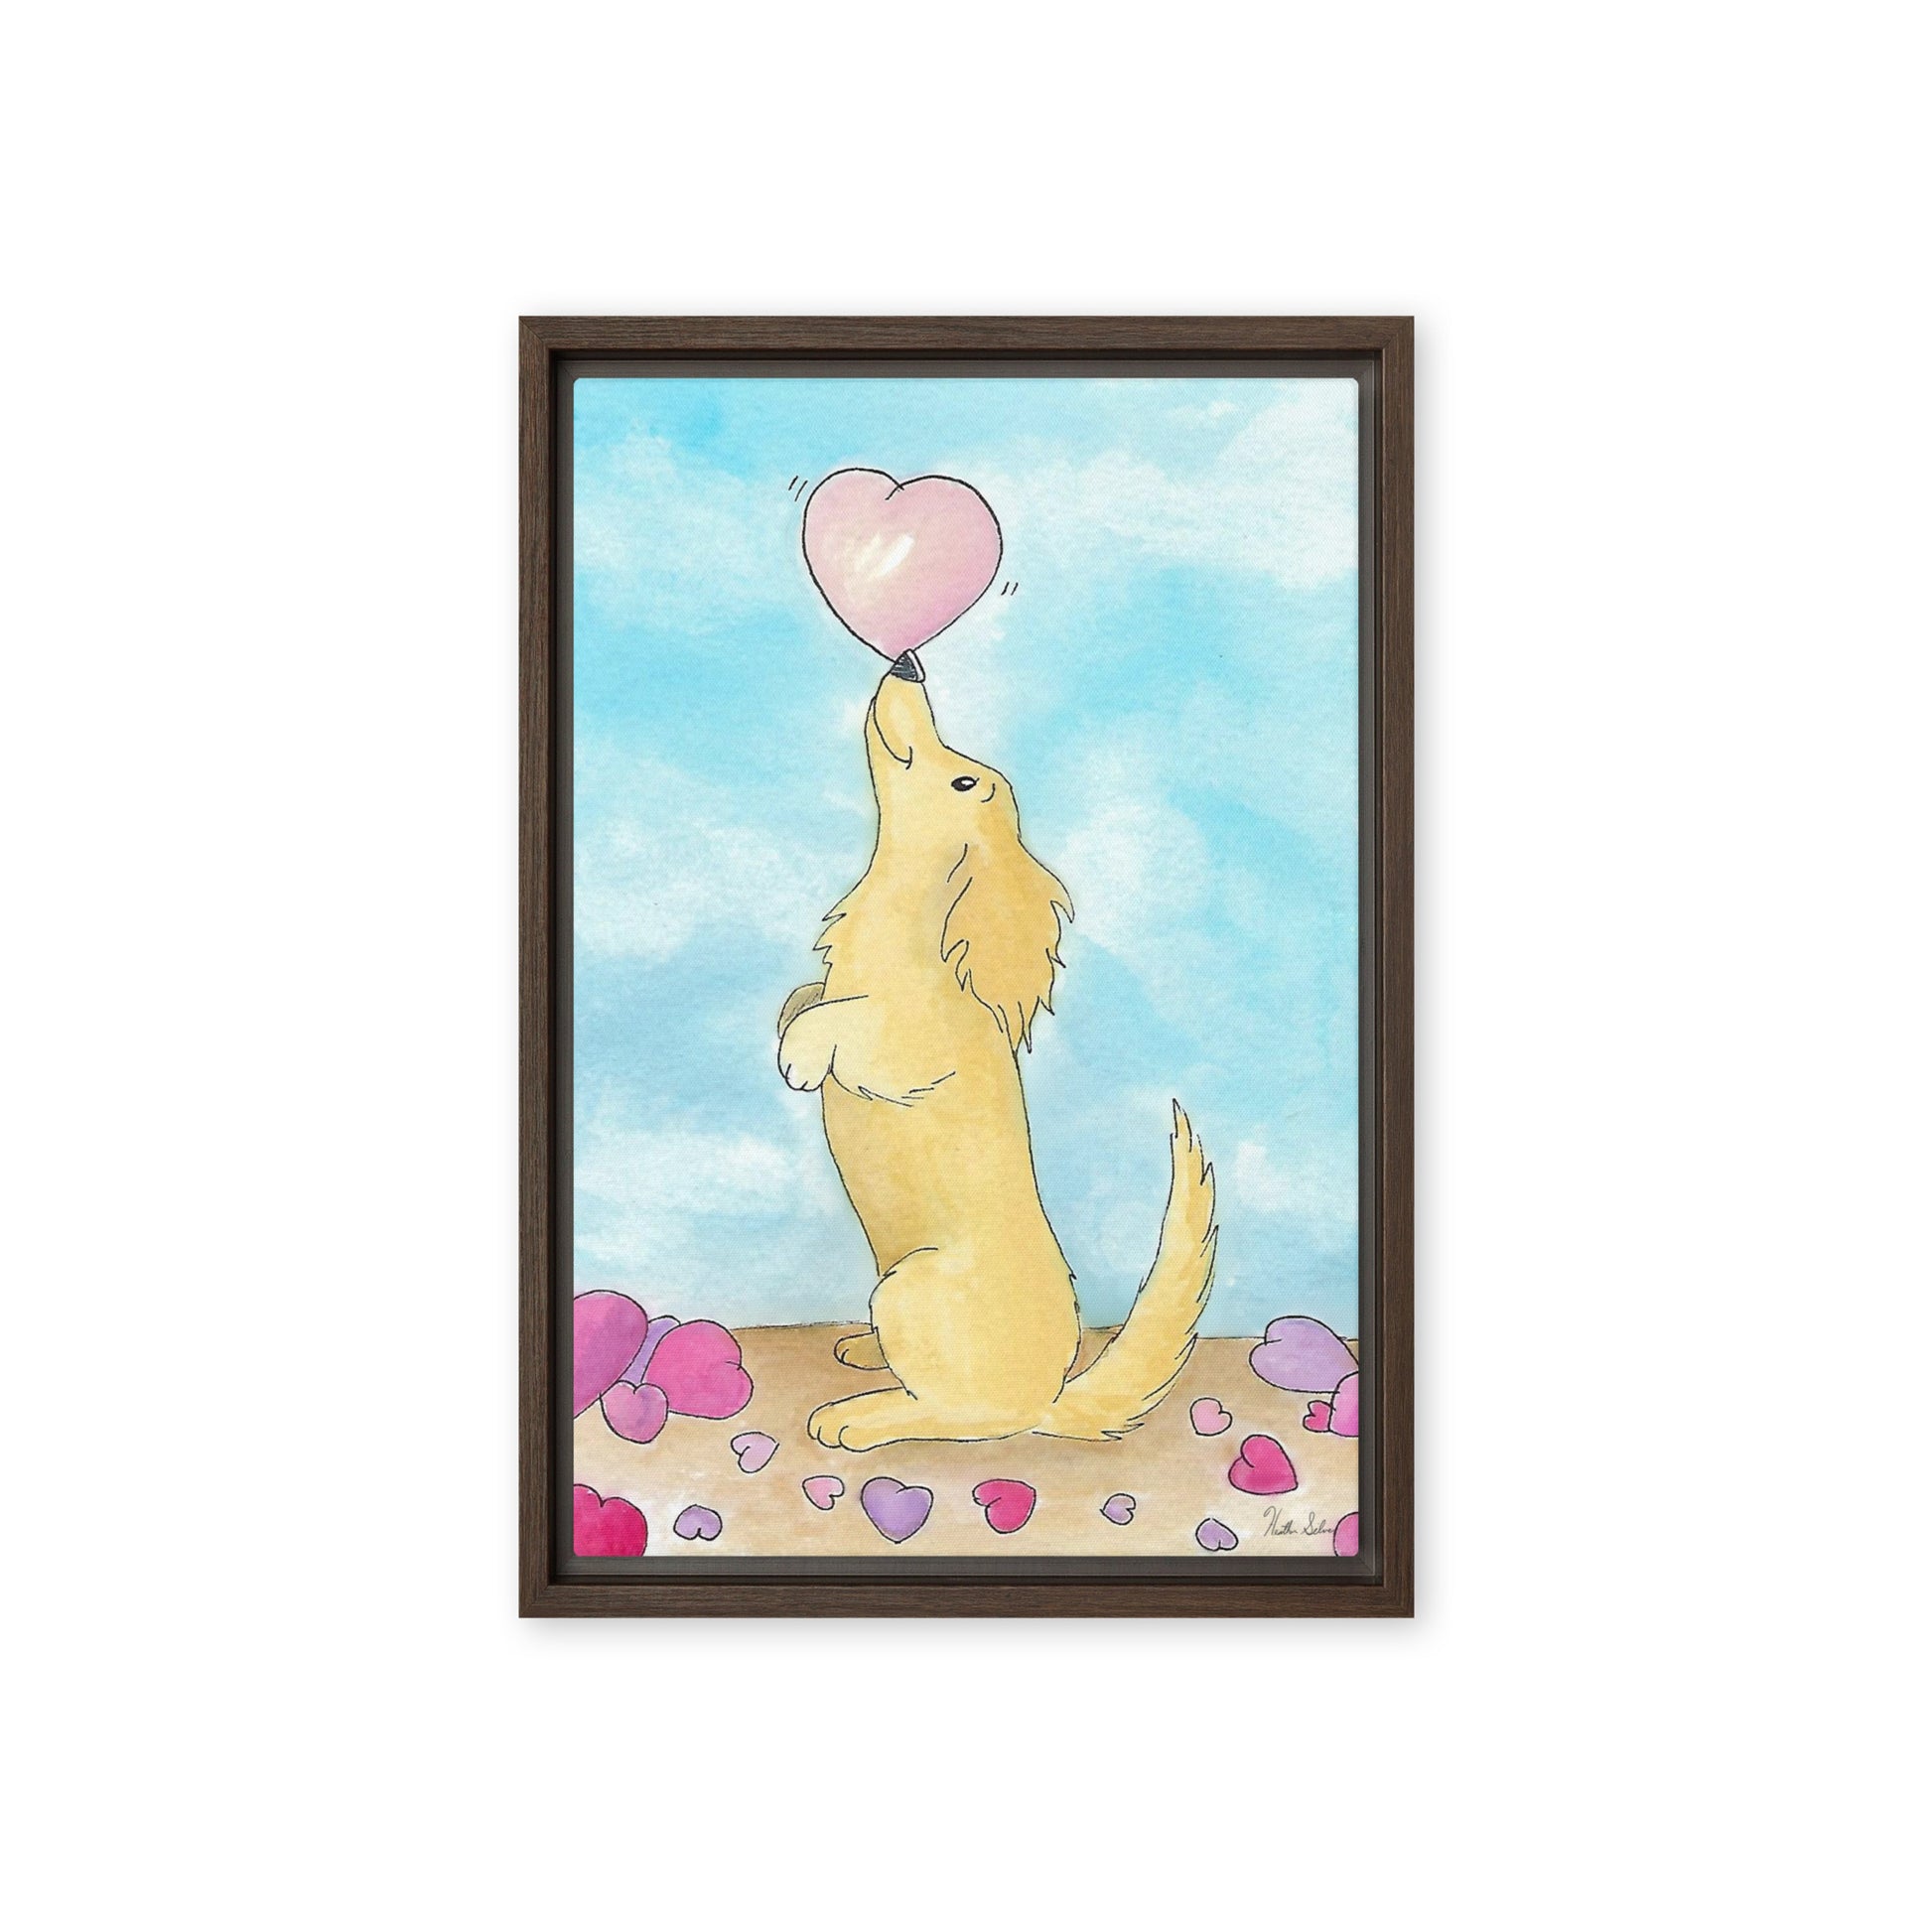 12 by 18 inch framed canvas Puppy Love print. The canvas is in a brown pine wood frame.